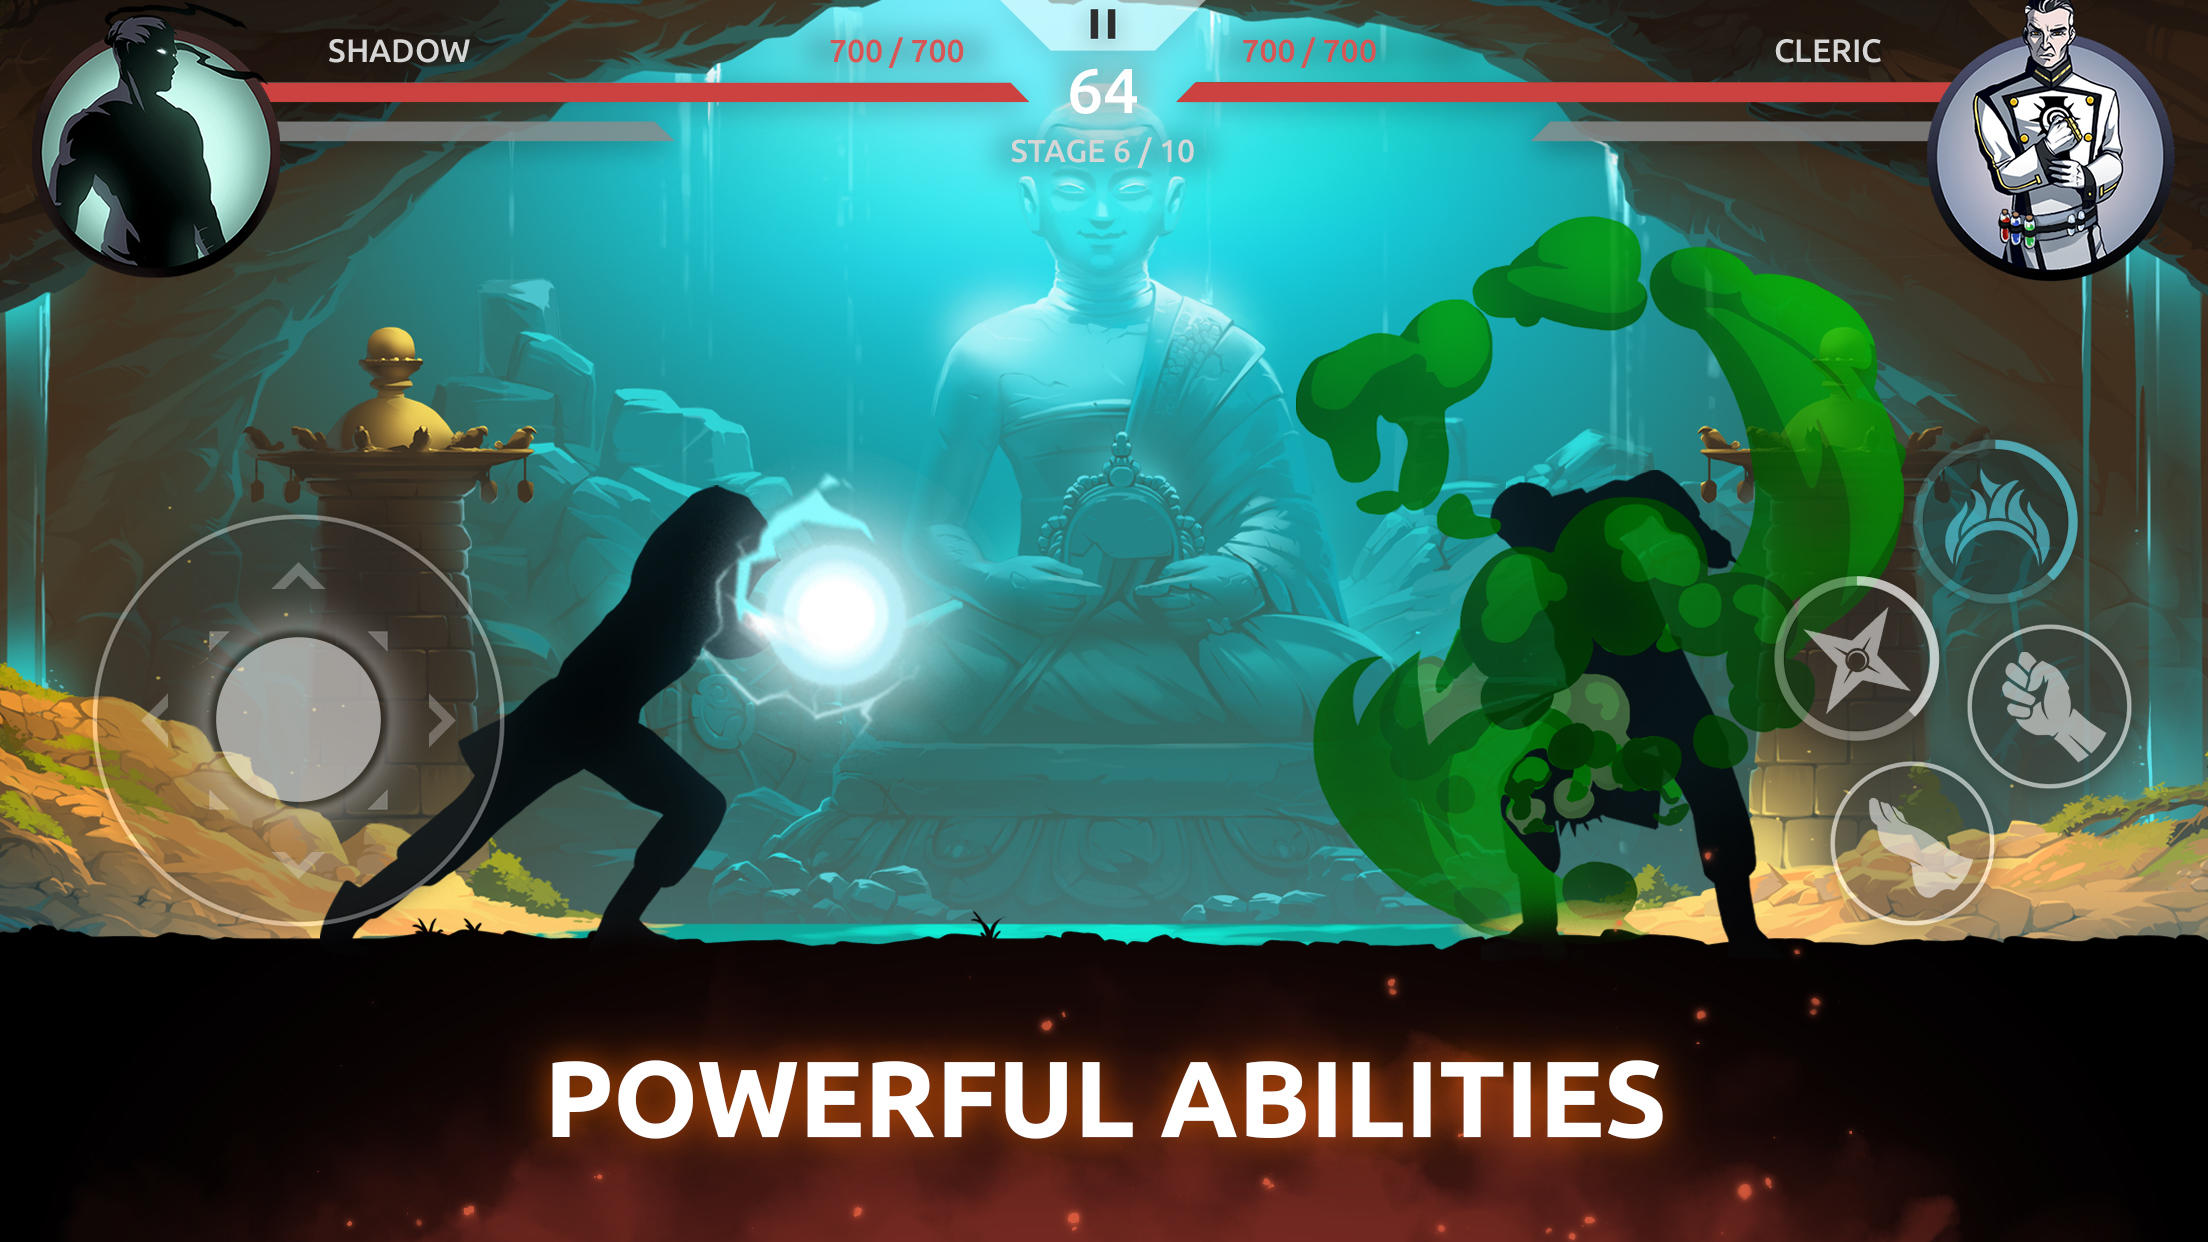 Shadow Fight 2 update out now